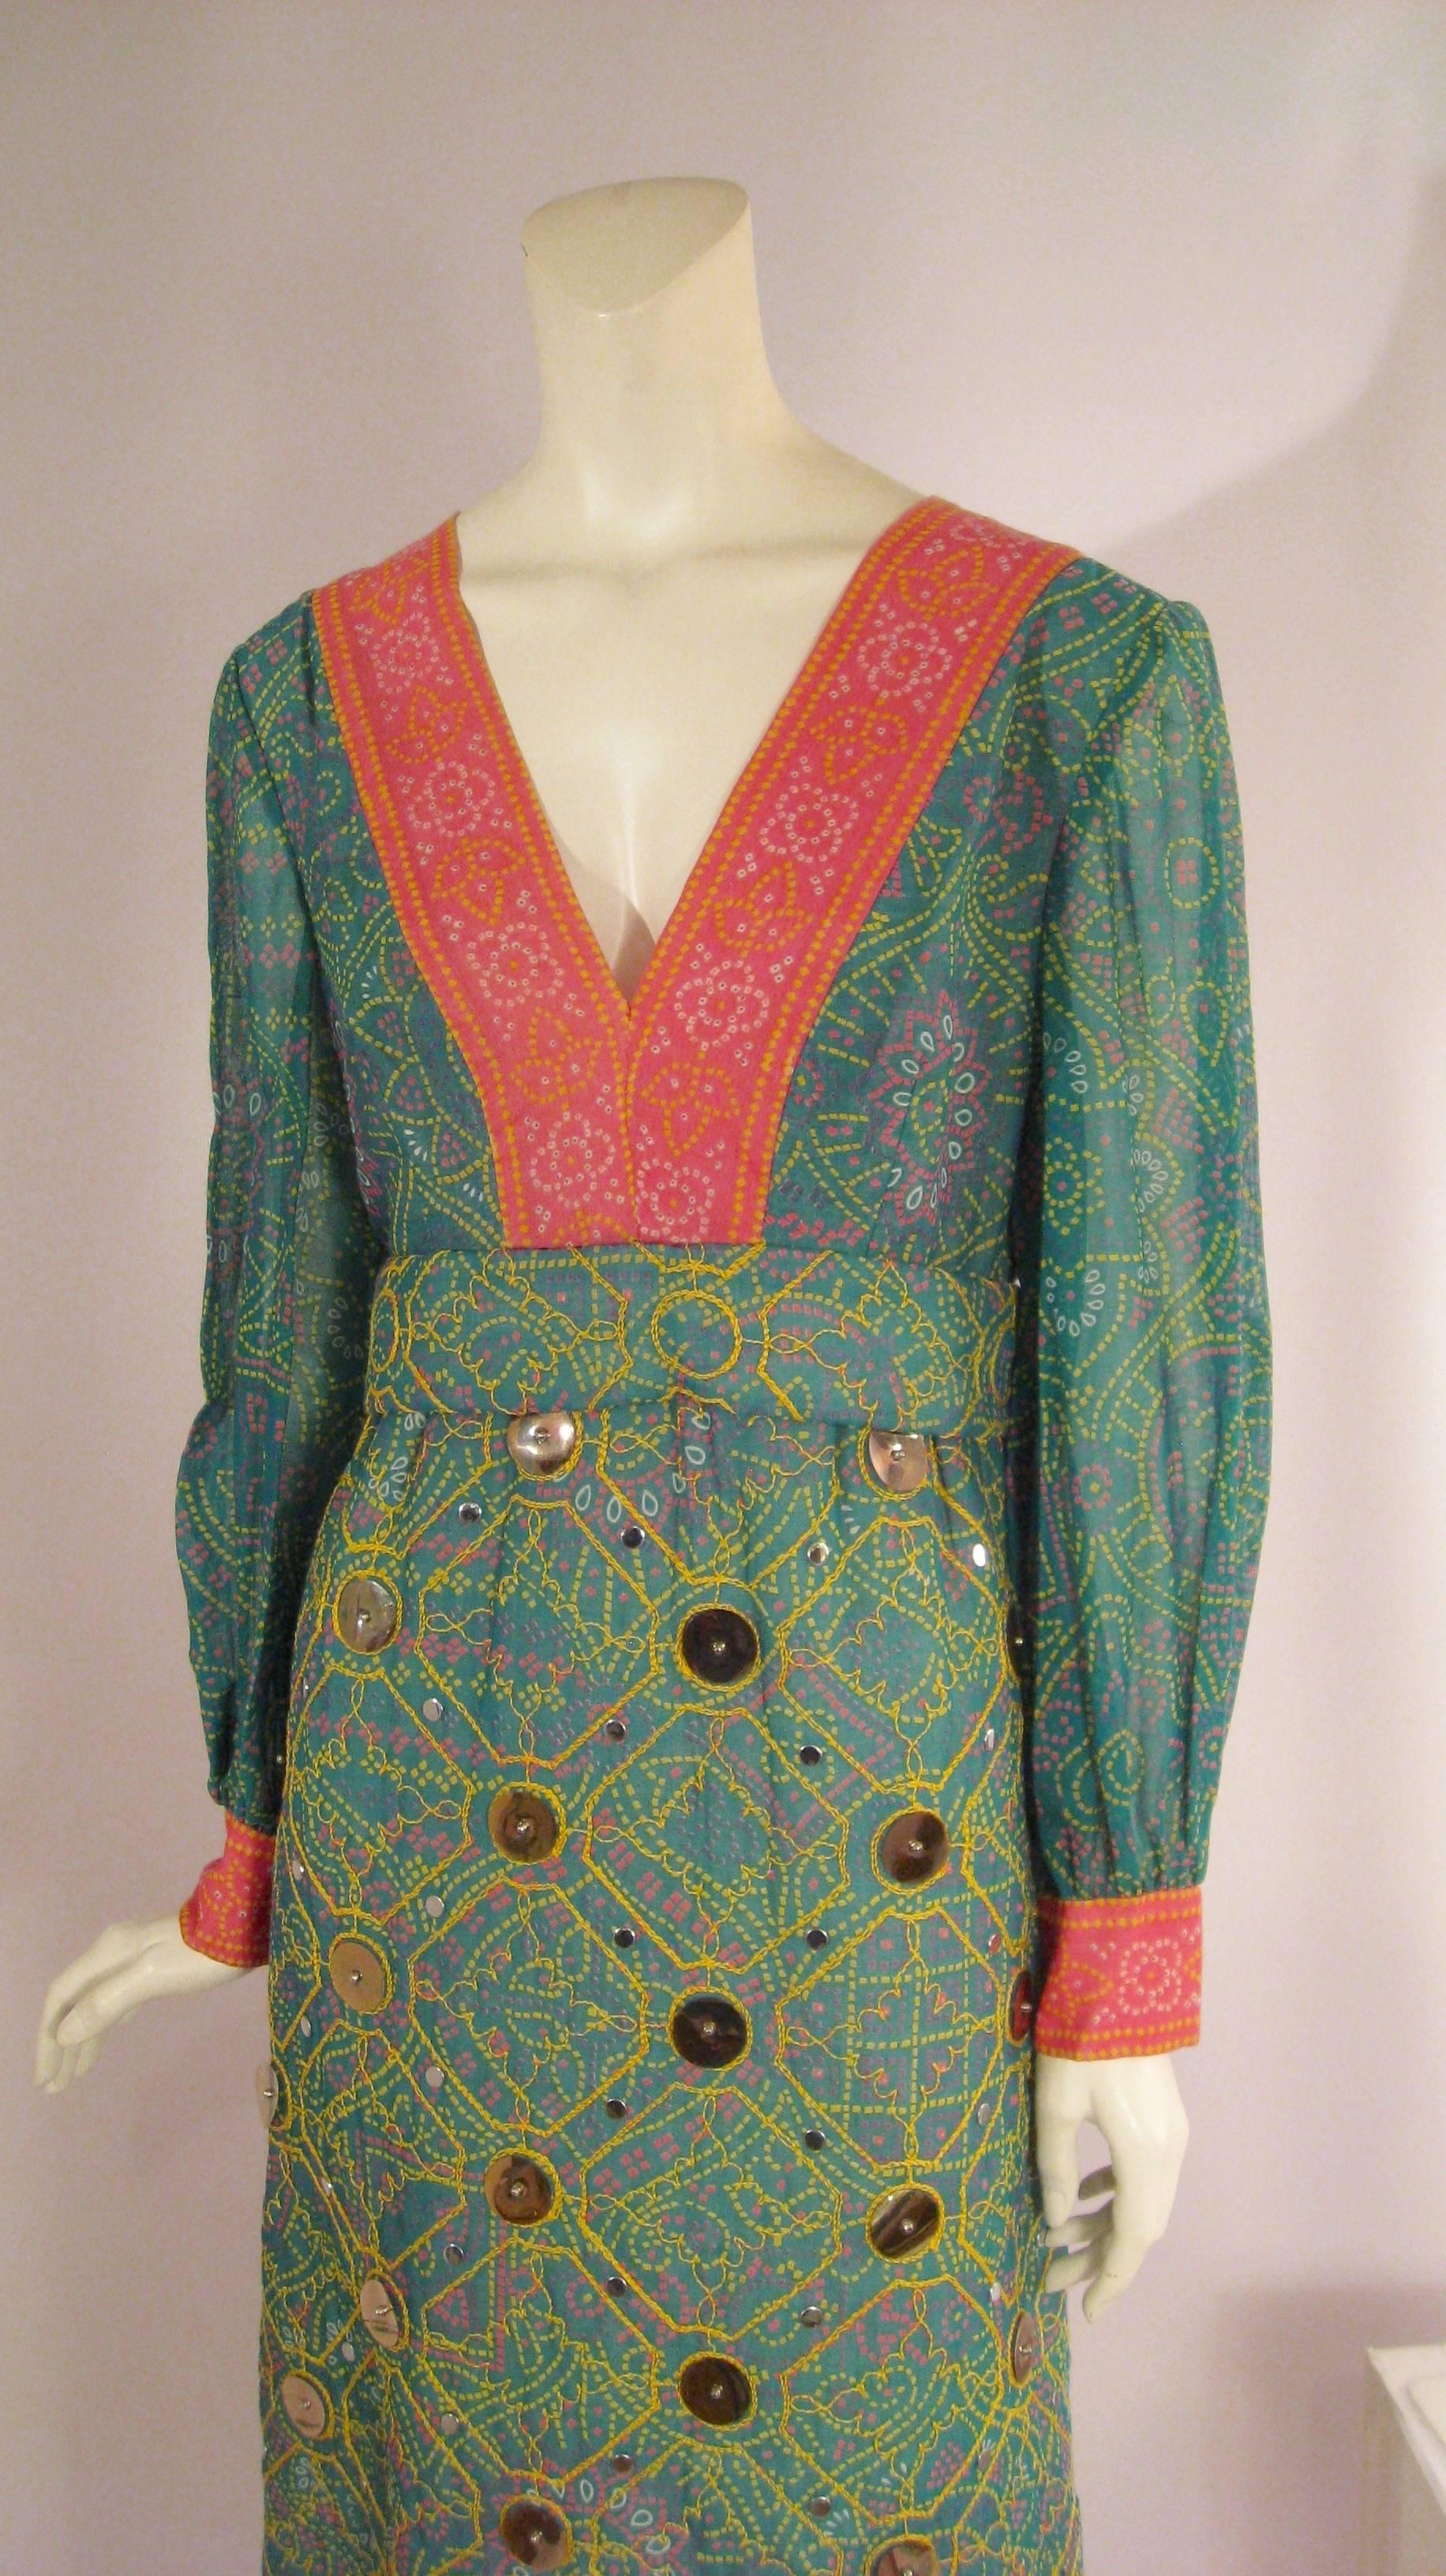 American Oscar de la Renta Attributed 1970s Ethnic Print Dress with Embroidery Paillettes